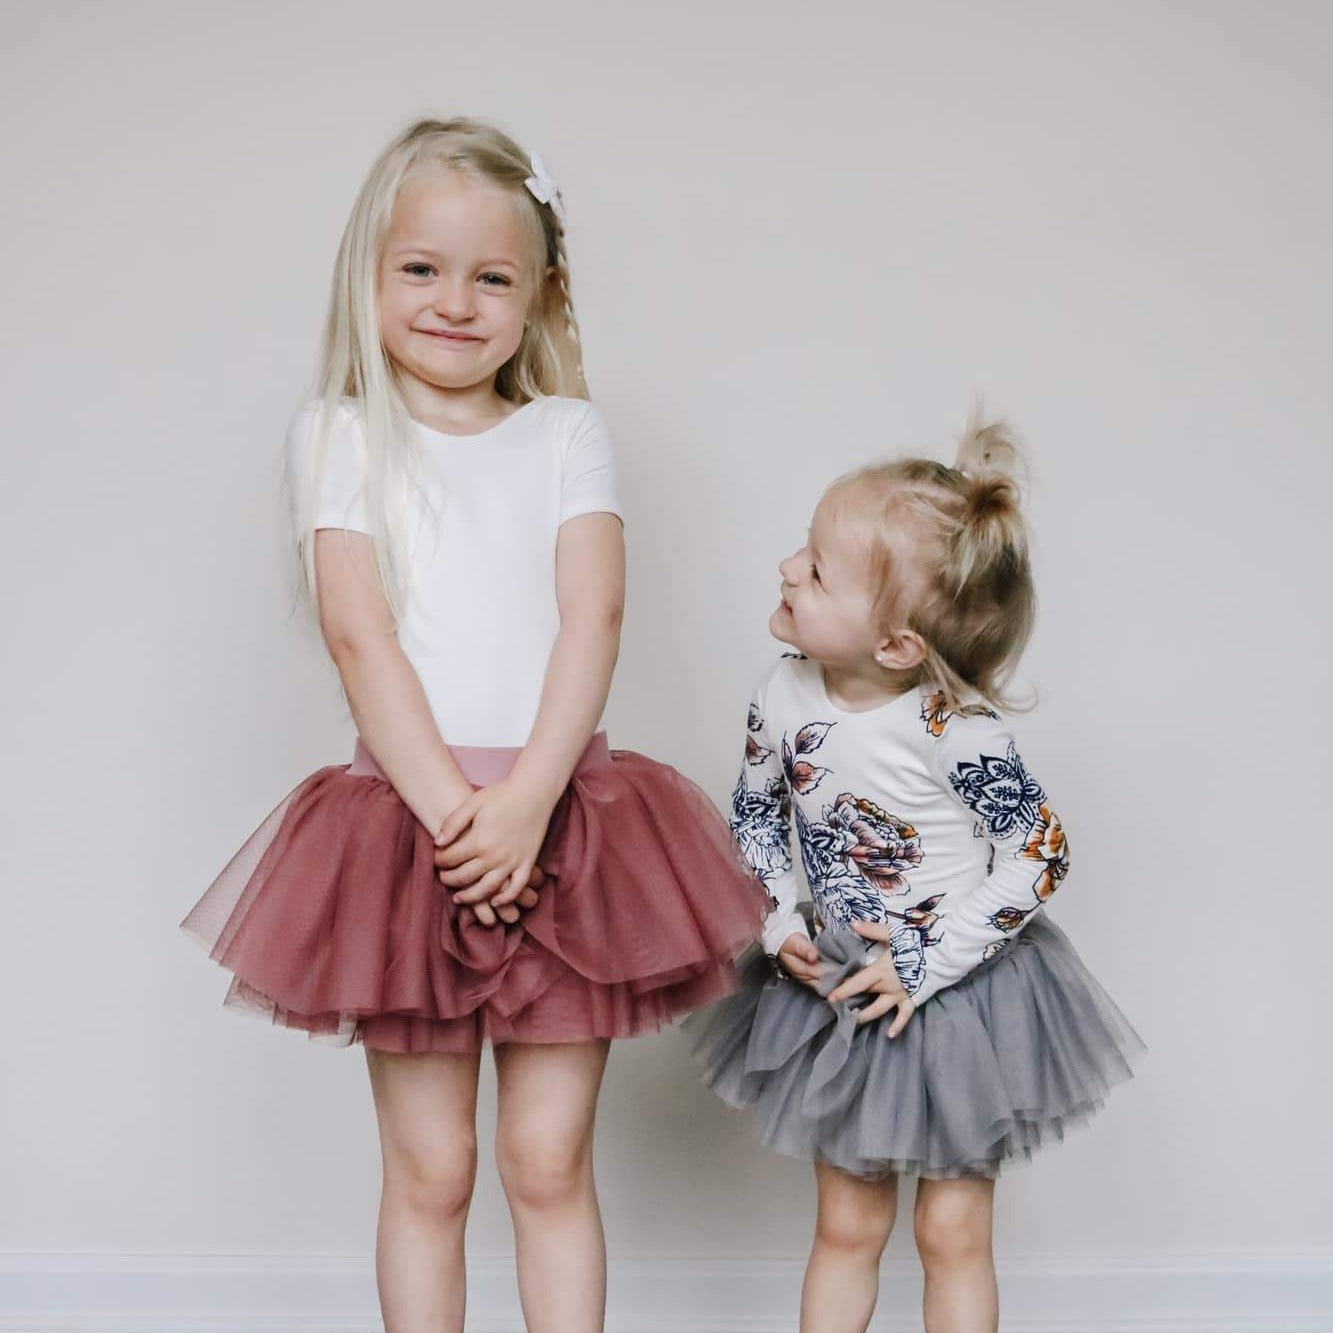 Solid Tutu Bloomers